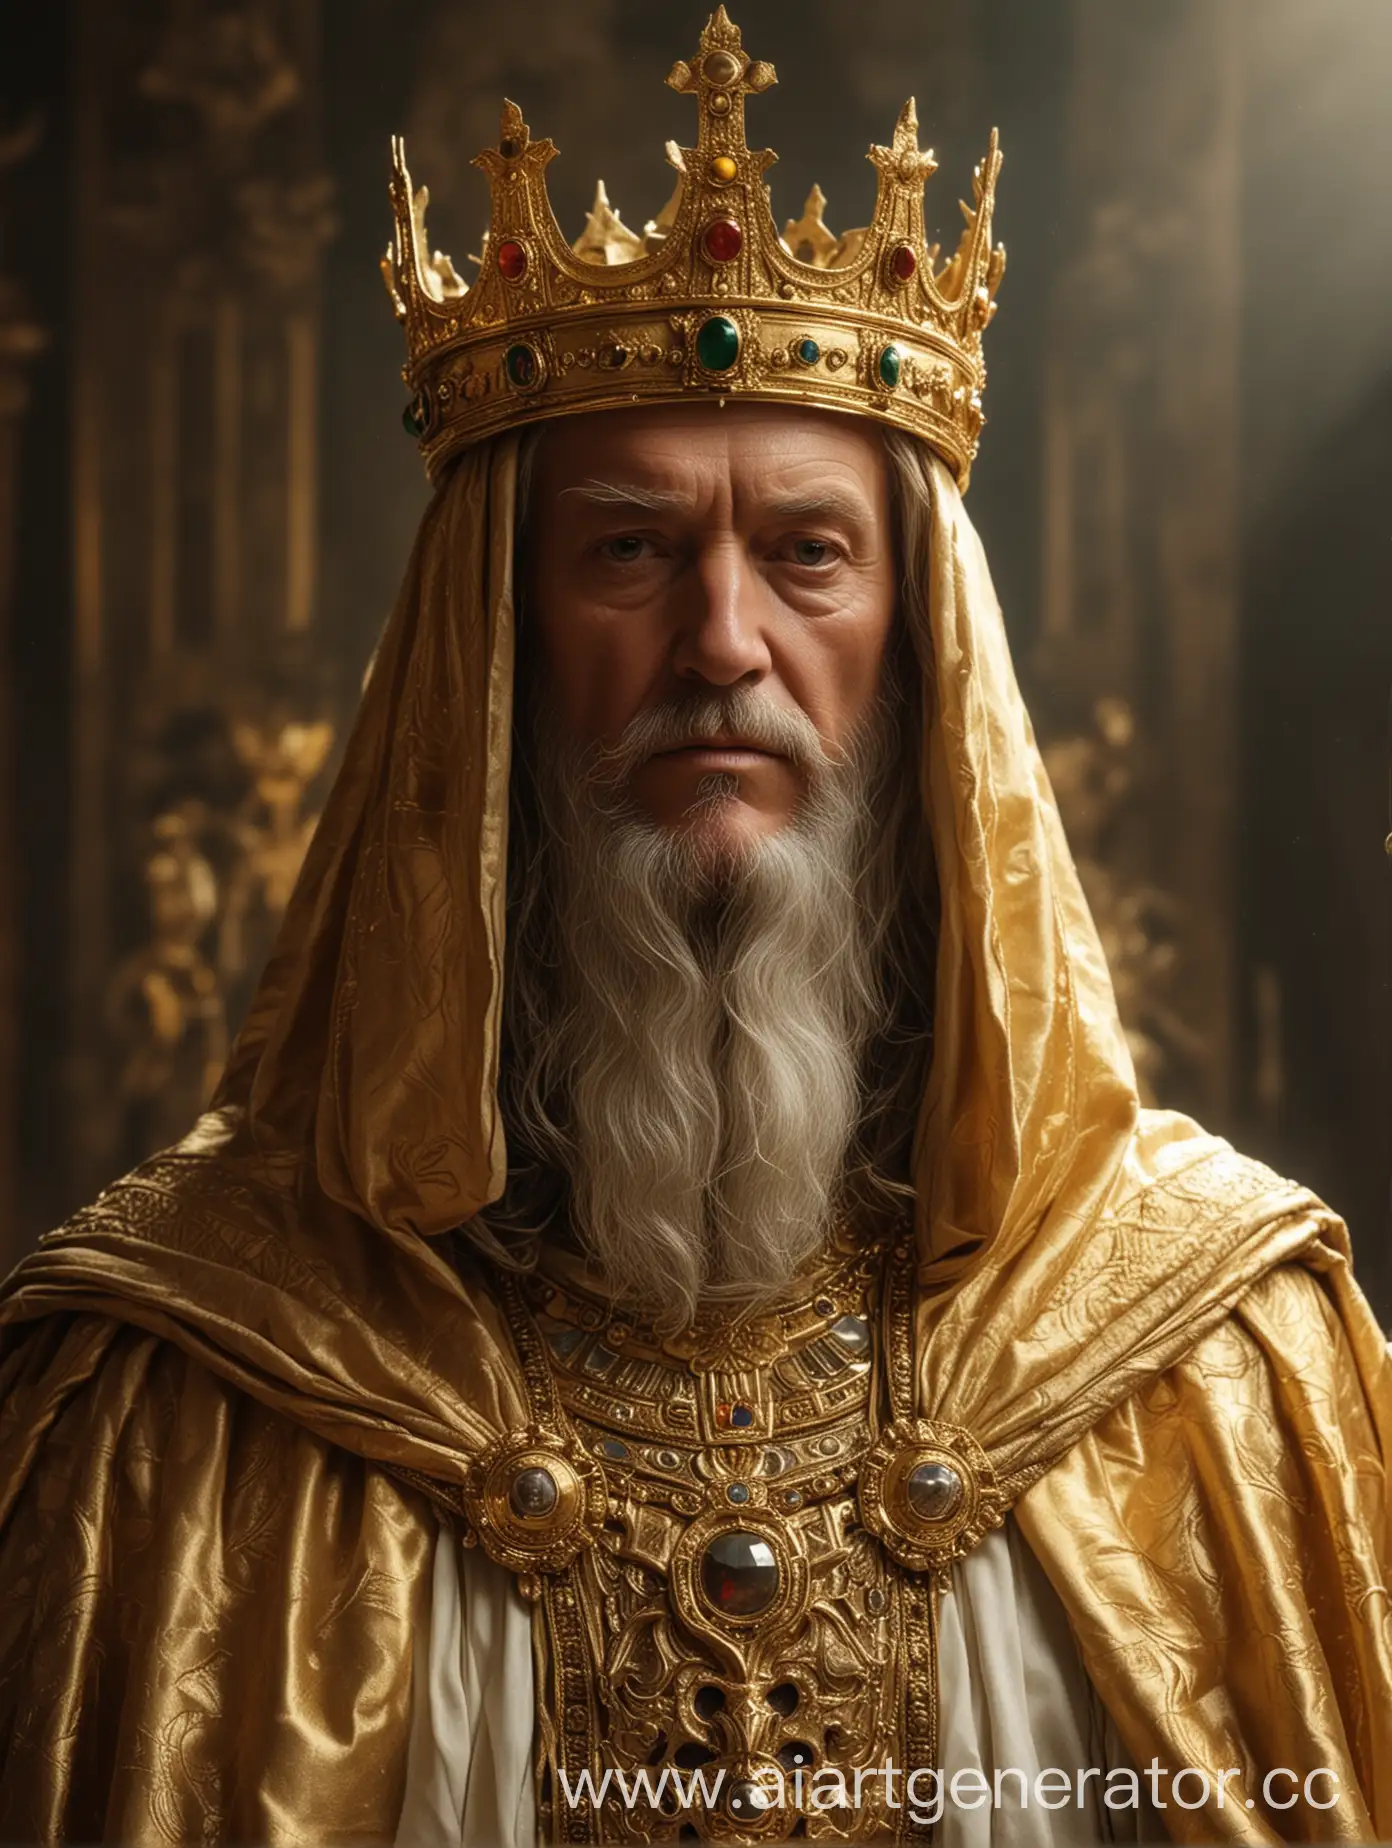 Regal-Emperor-in-Golden-Crown-and-Mantle-Gazing-at-Camera